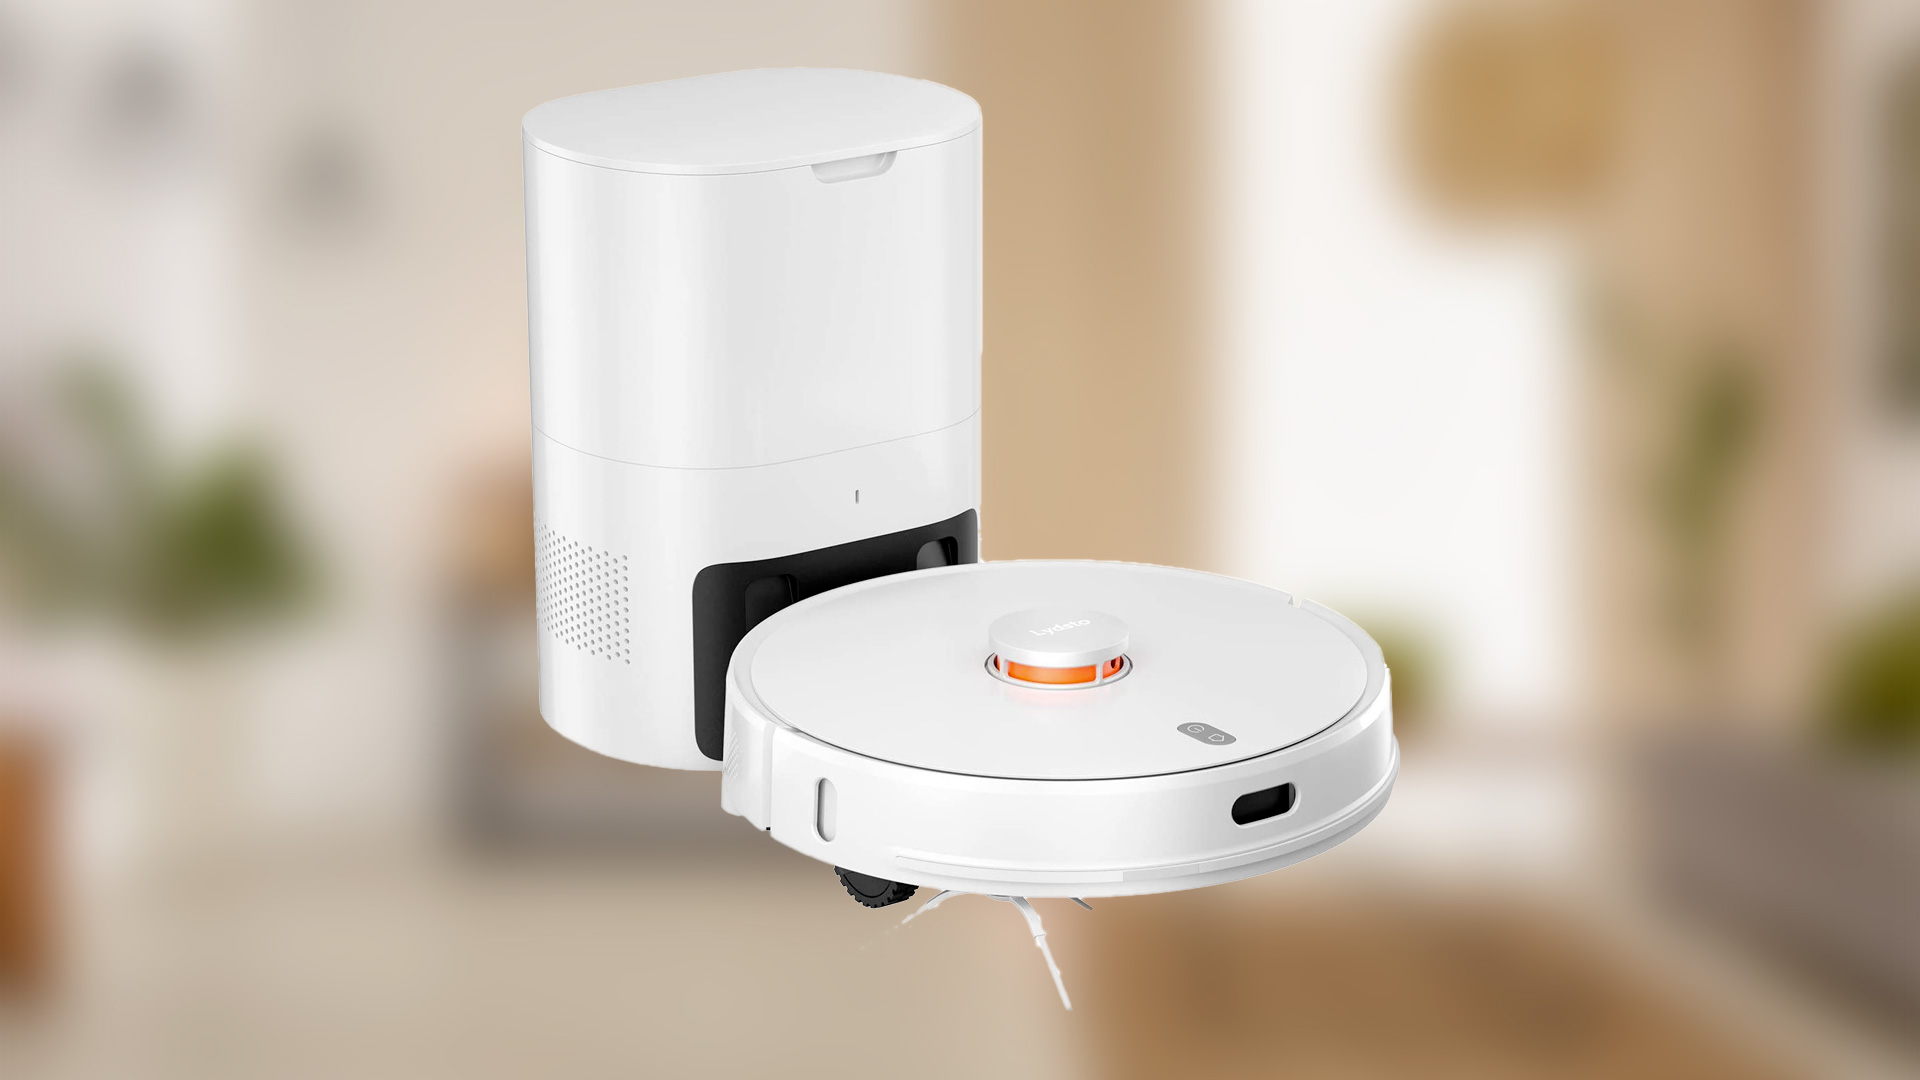 Xiaomi Lydsto R1 Robot Vacuum Cleaner